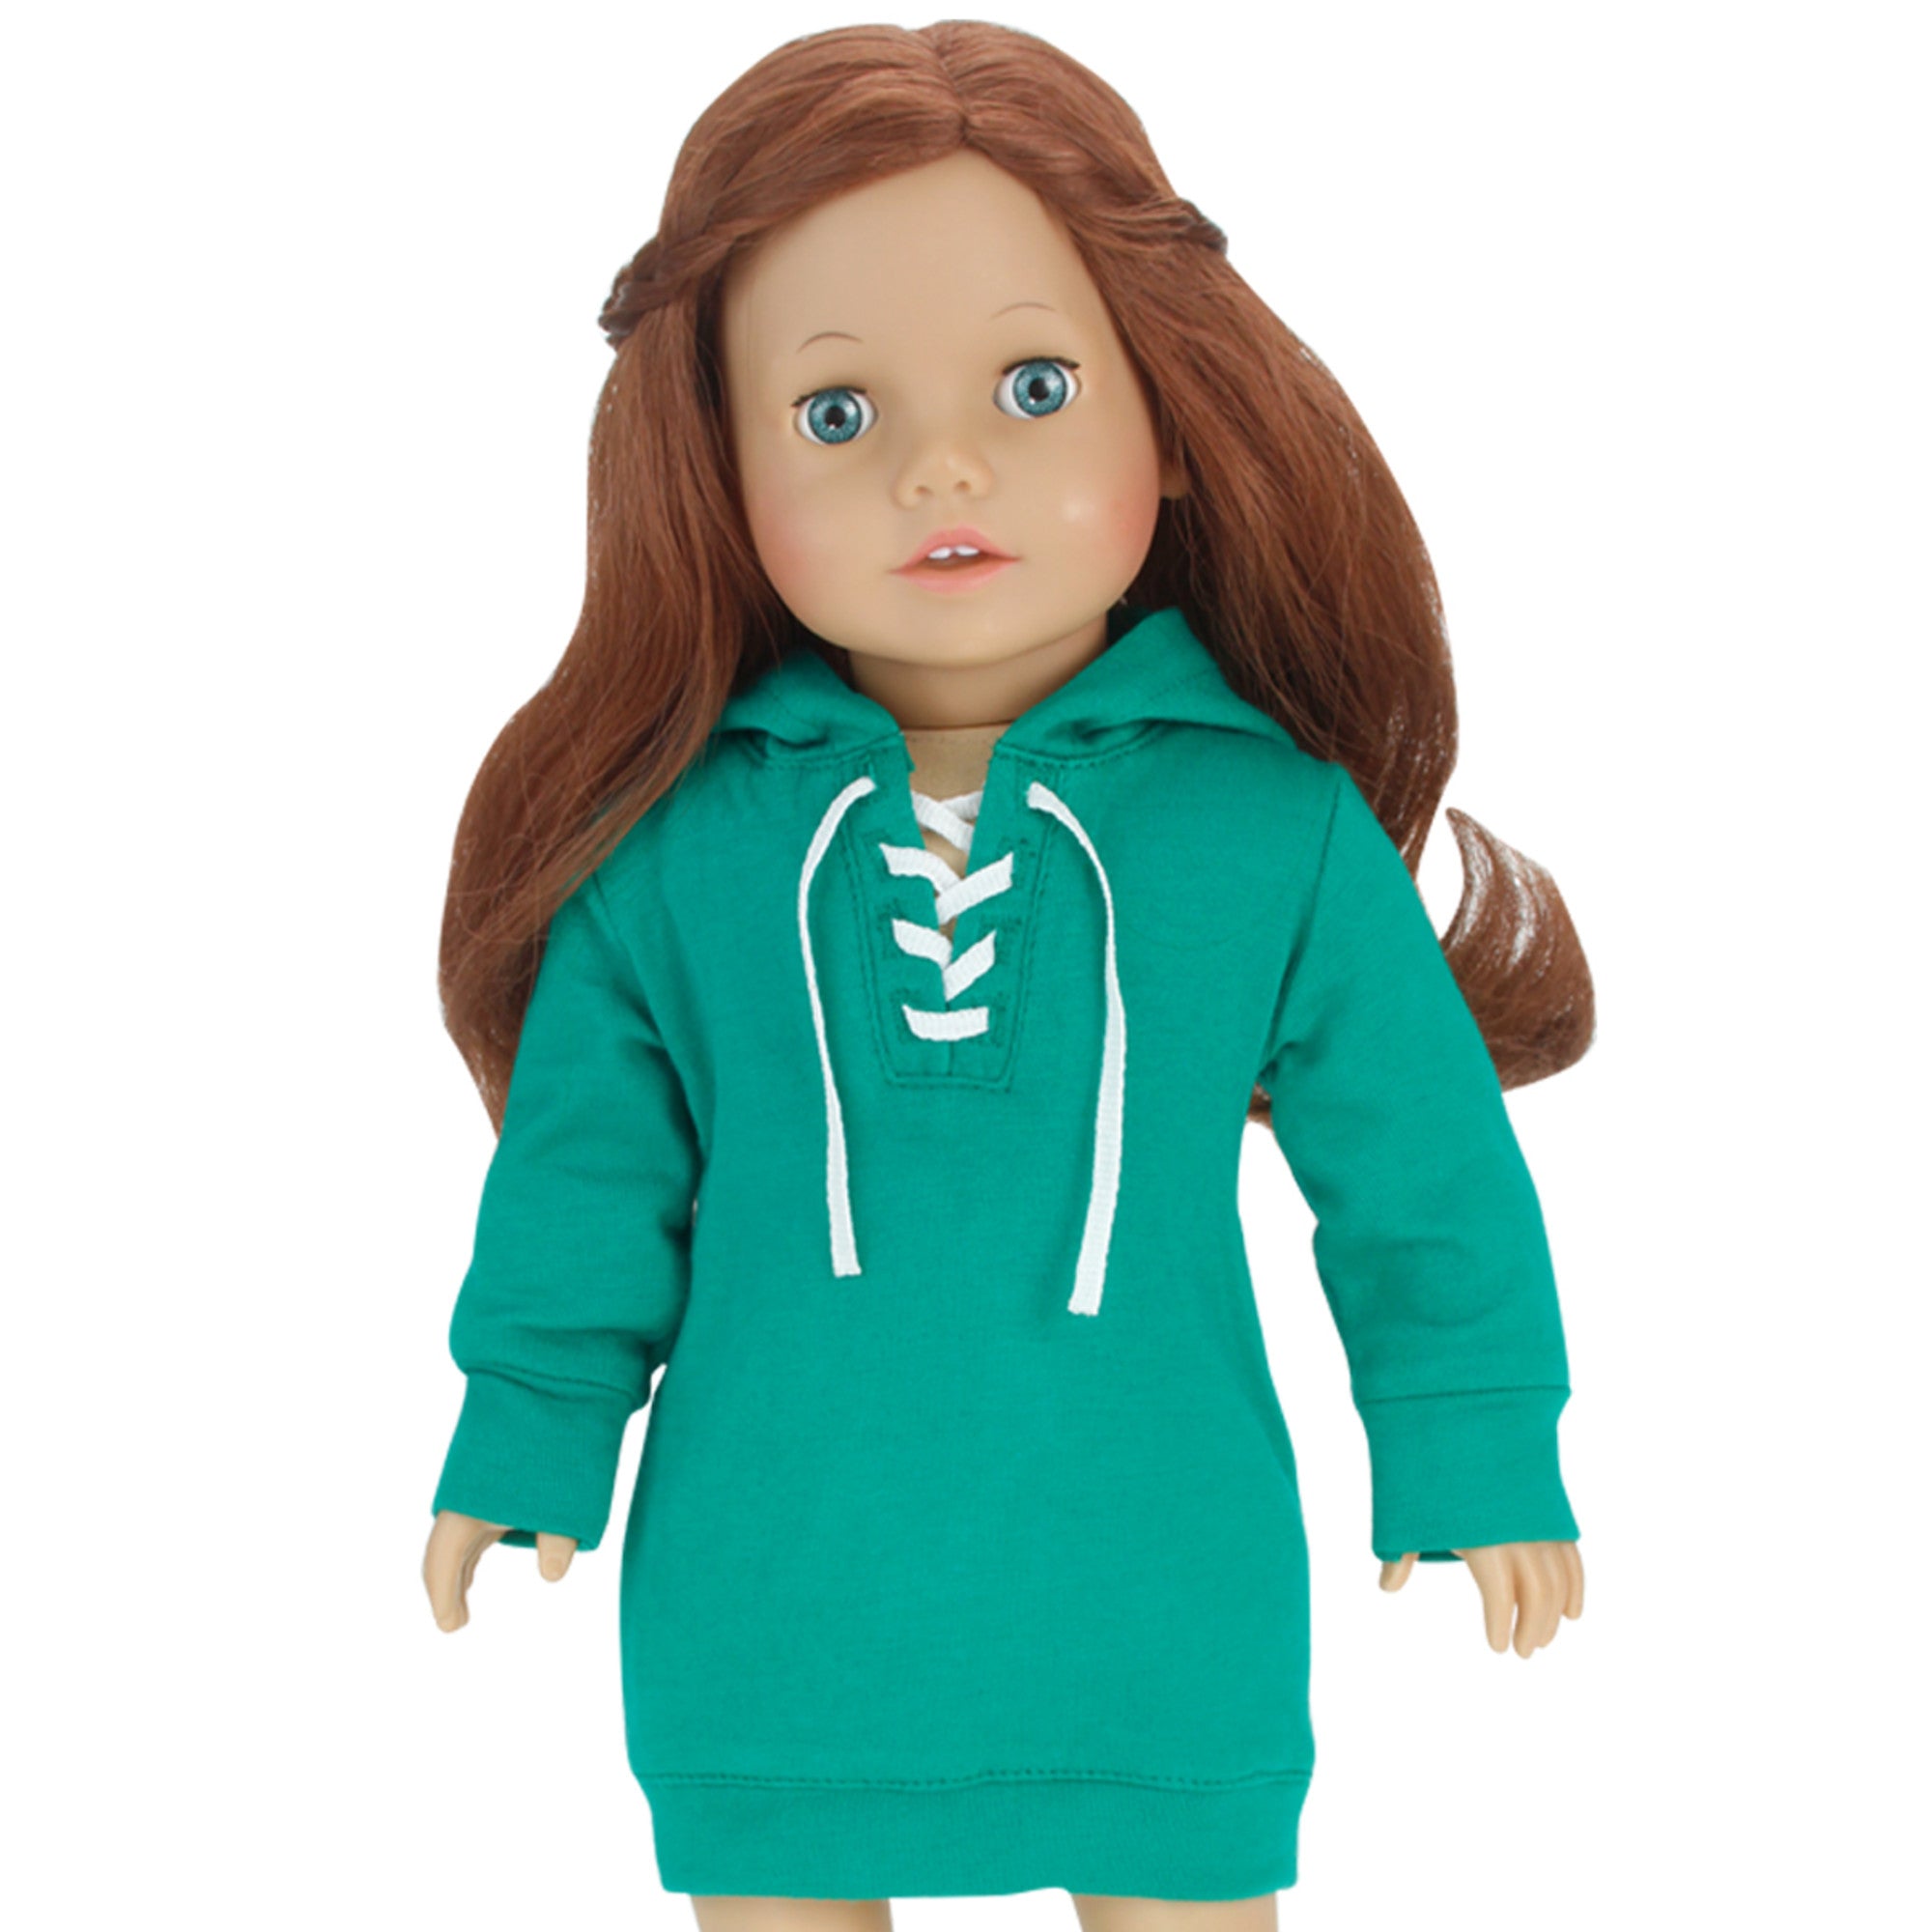 Sophia’s Casual Chic Long-Sleeved Lace-Up Front Hooded Sweatshirt Dress Hoodie for 18” Dolls, Green